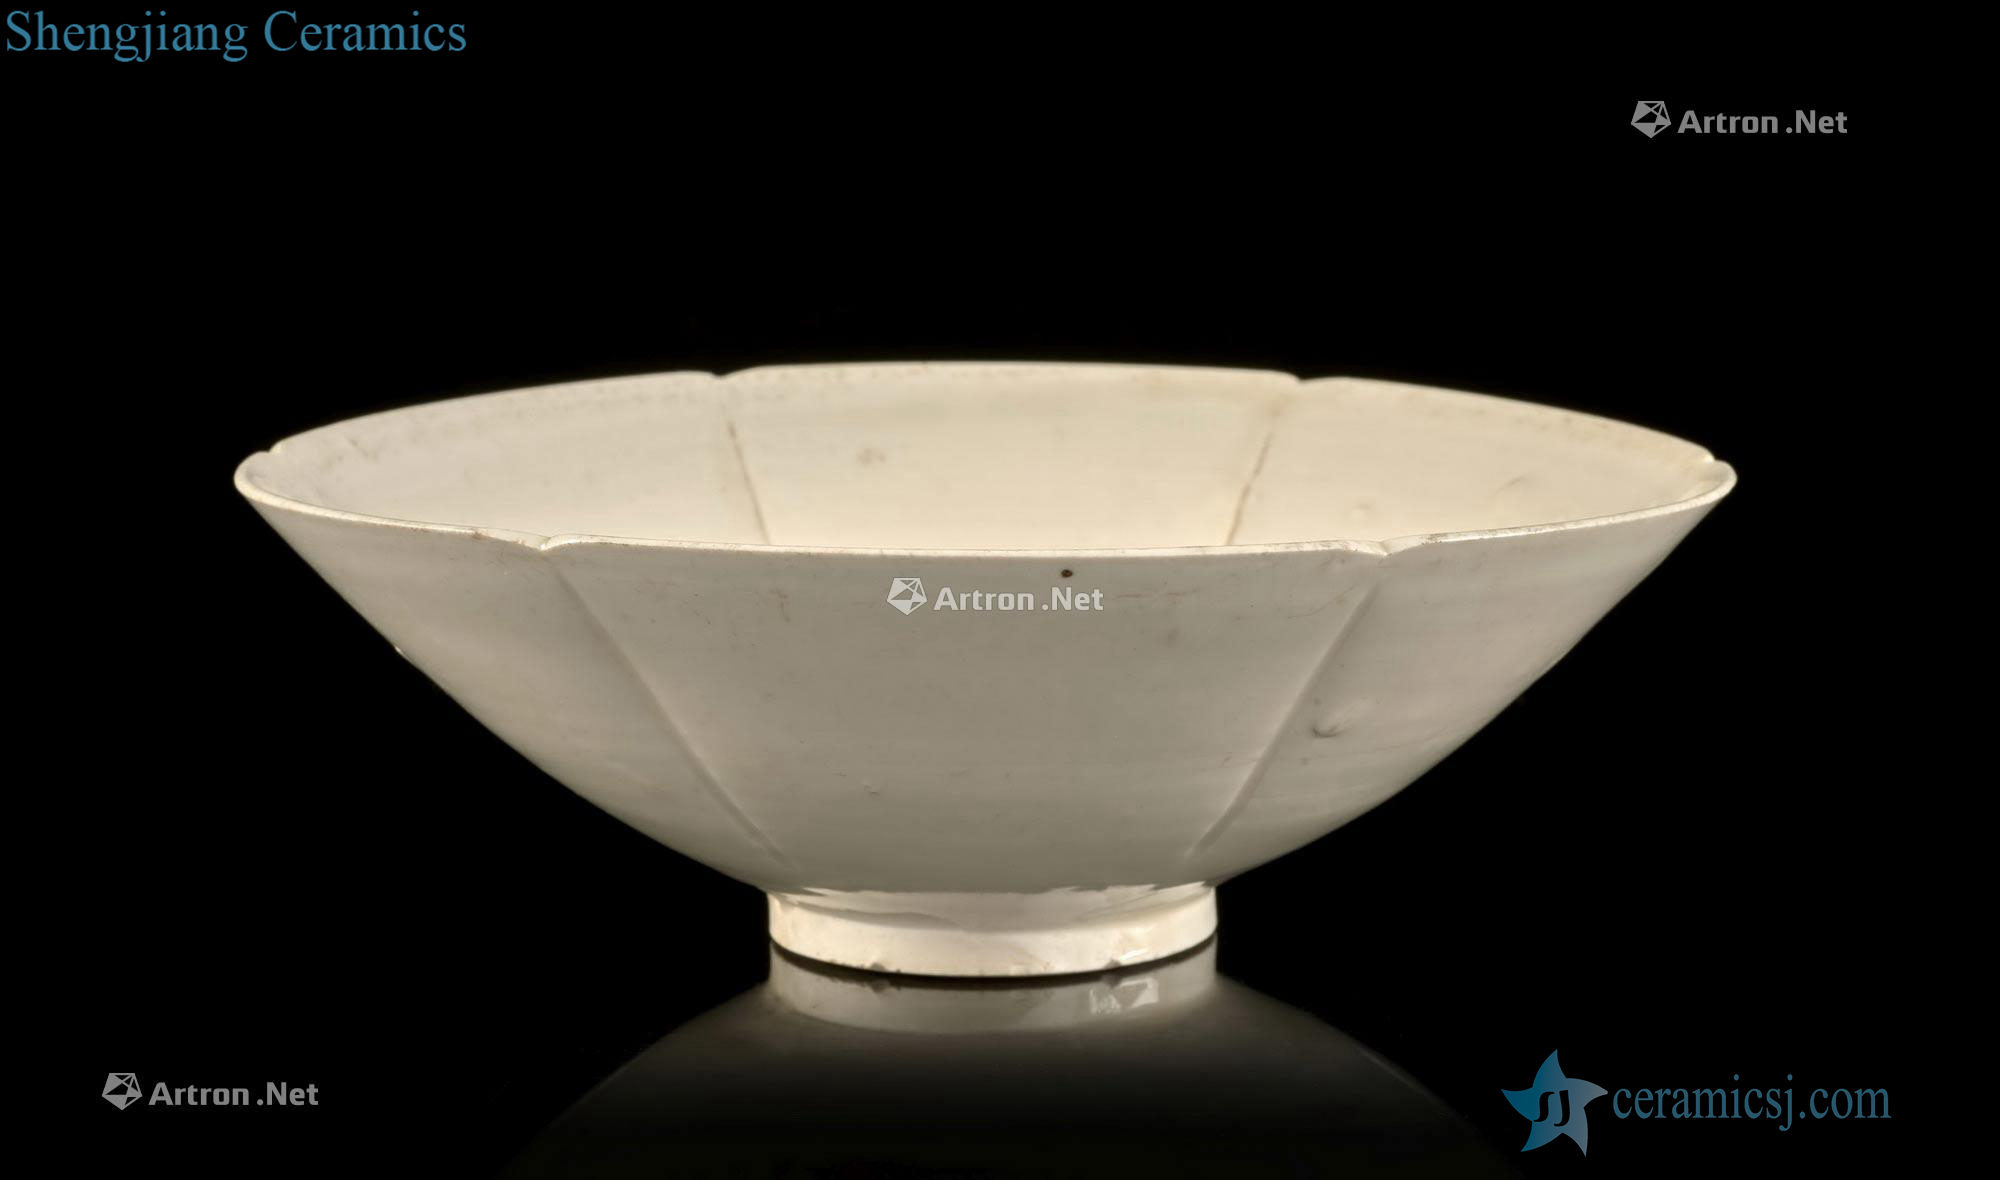 China, the Song dynasty, the 12 th century A Dingyao bowl